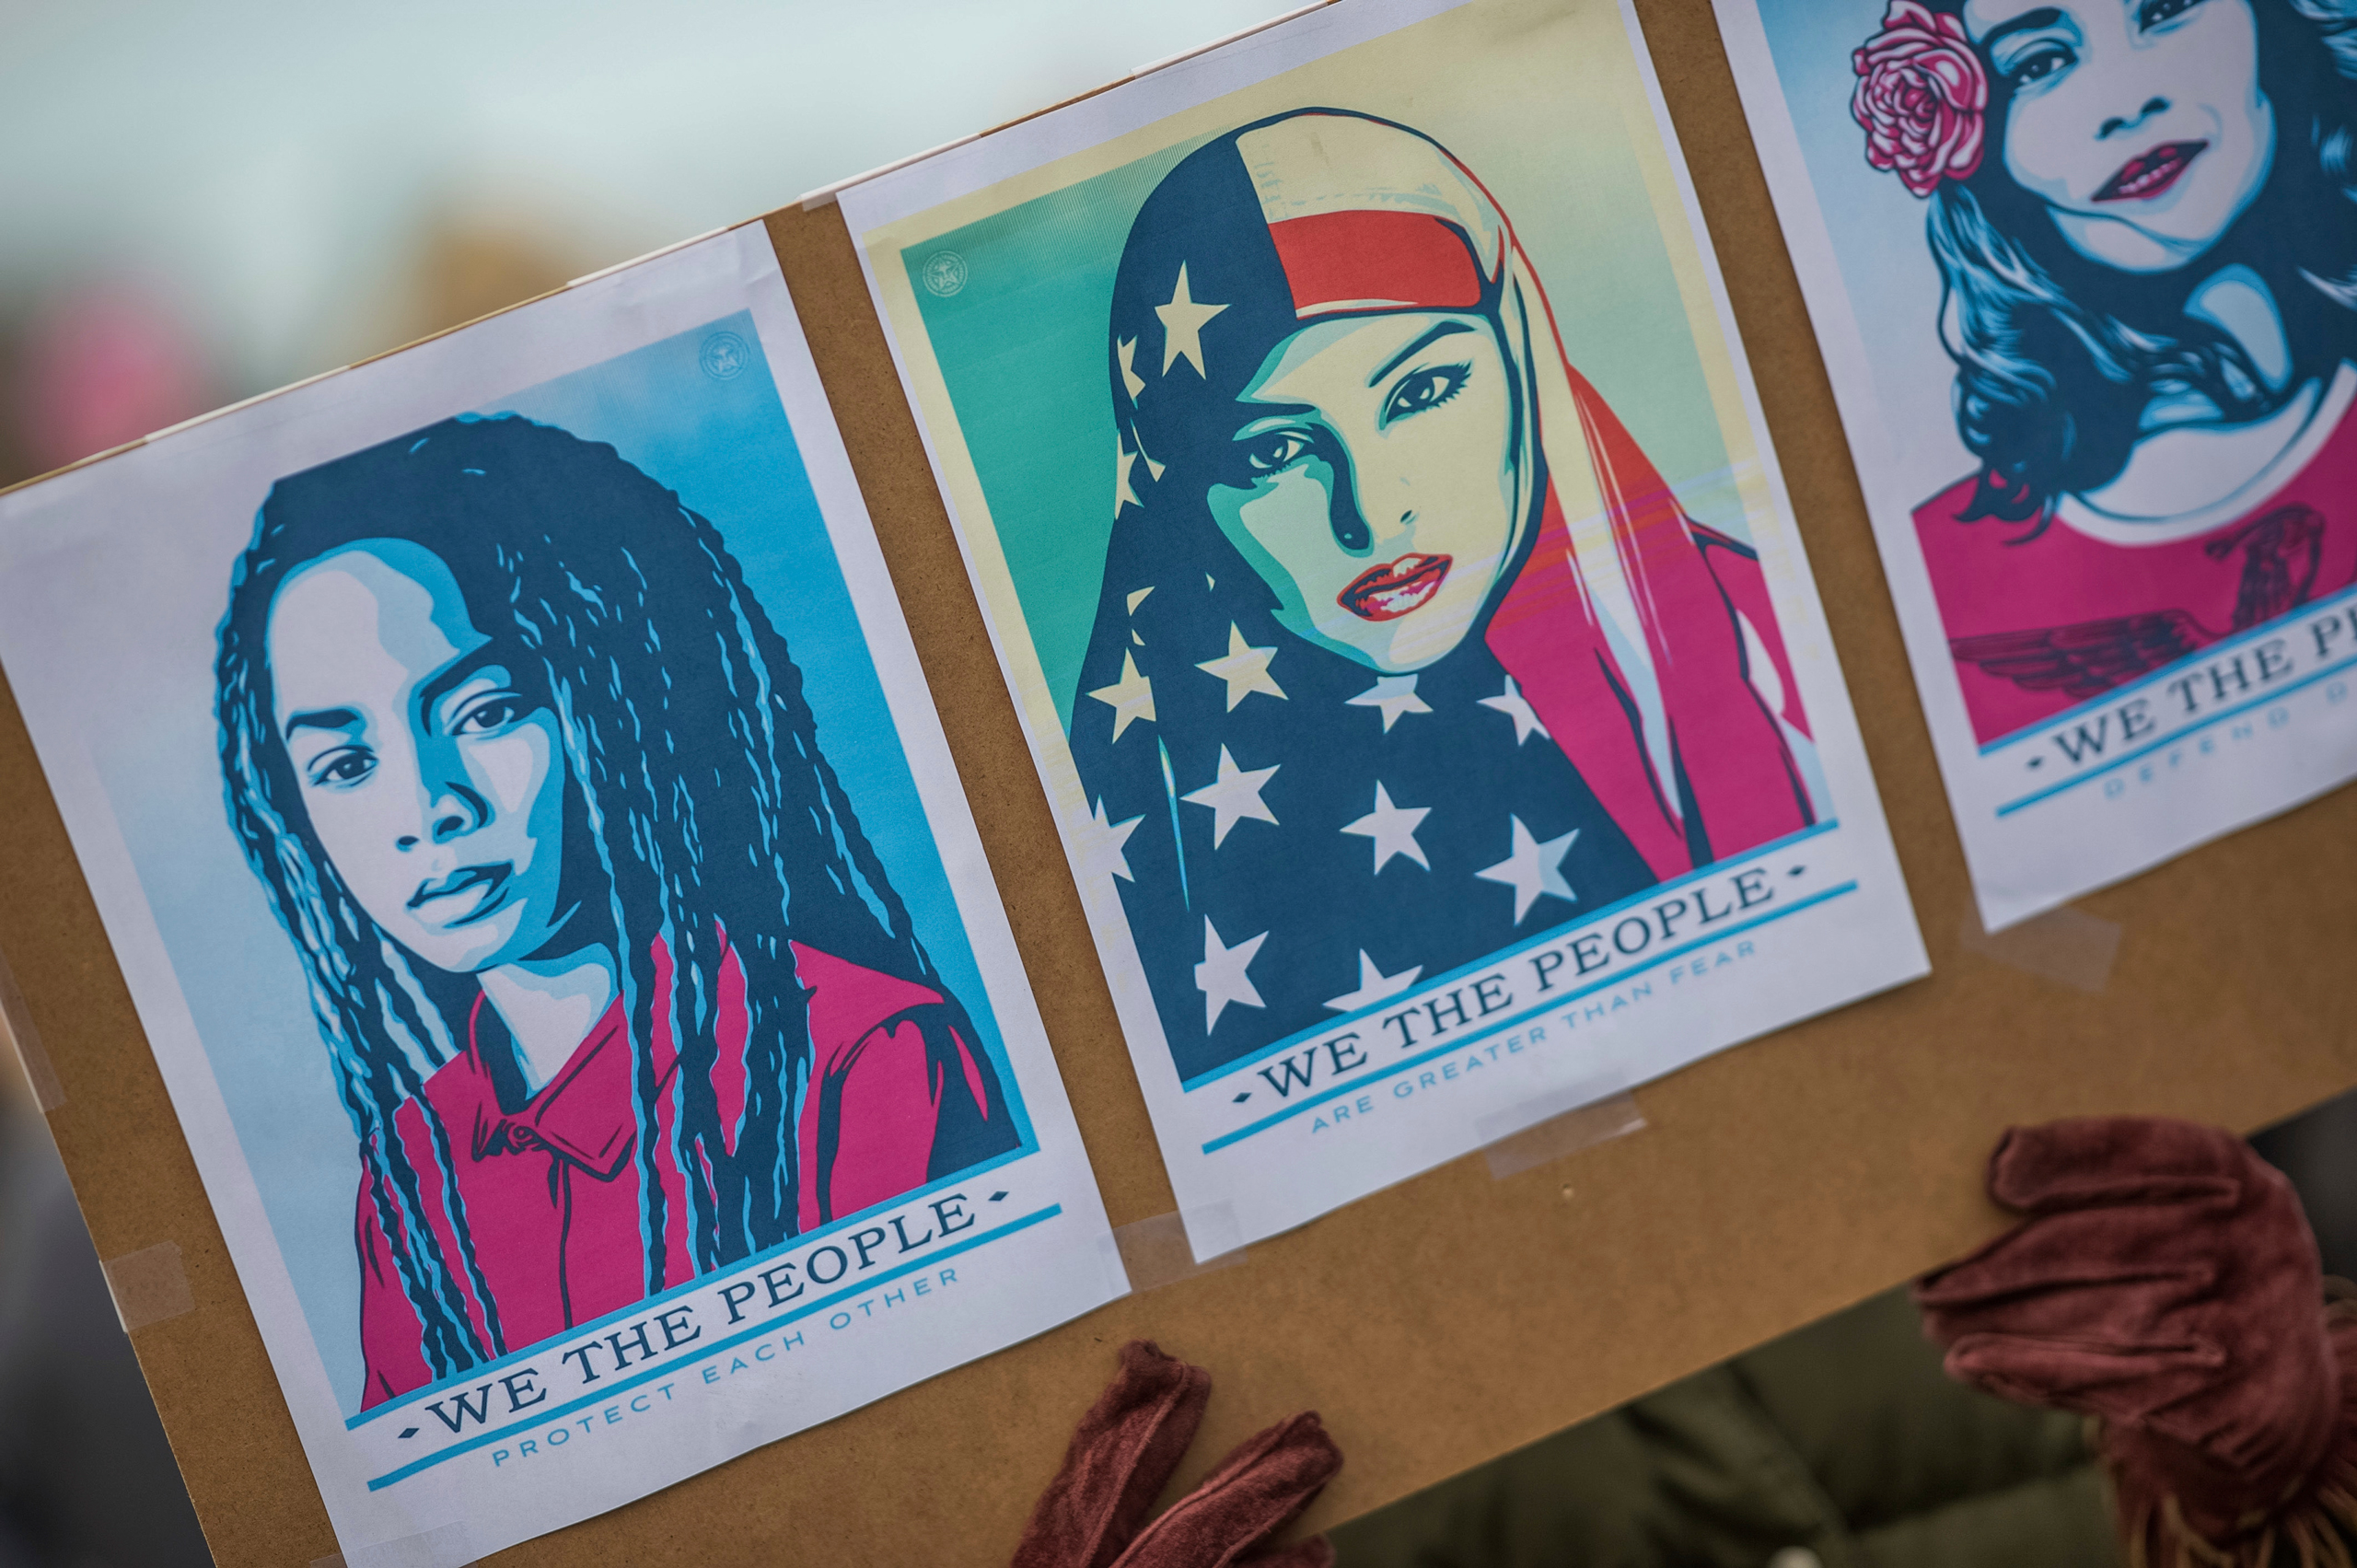 Protesters hold signs in Paris on January 21, 2017 during a women's march in solidarity with women in the US marching against Trump and for women's rights. Following the inauguration of Donald Trump as the 45th president of the United States, the Womens March has spread to be a global march calling on all concerned citizens to stand up for equality, diversity and inclusion and for womens rights to be recognised around the world as human rights. Photo by Khanh Renaud/Sipa USA(Sipa via AP Images)